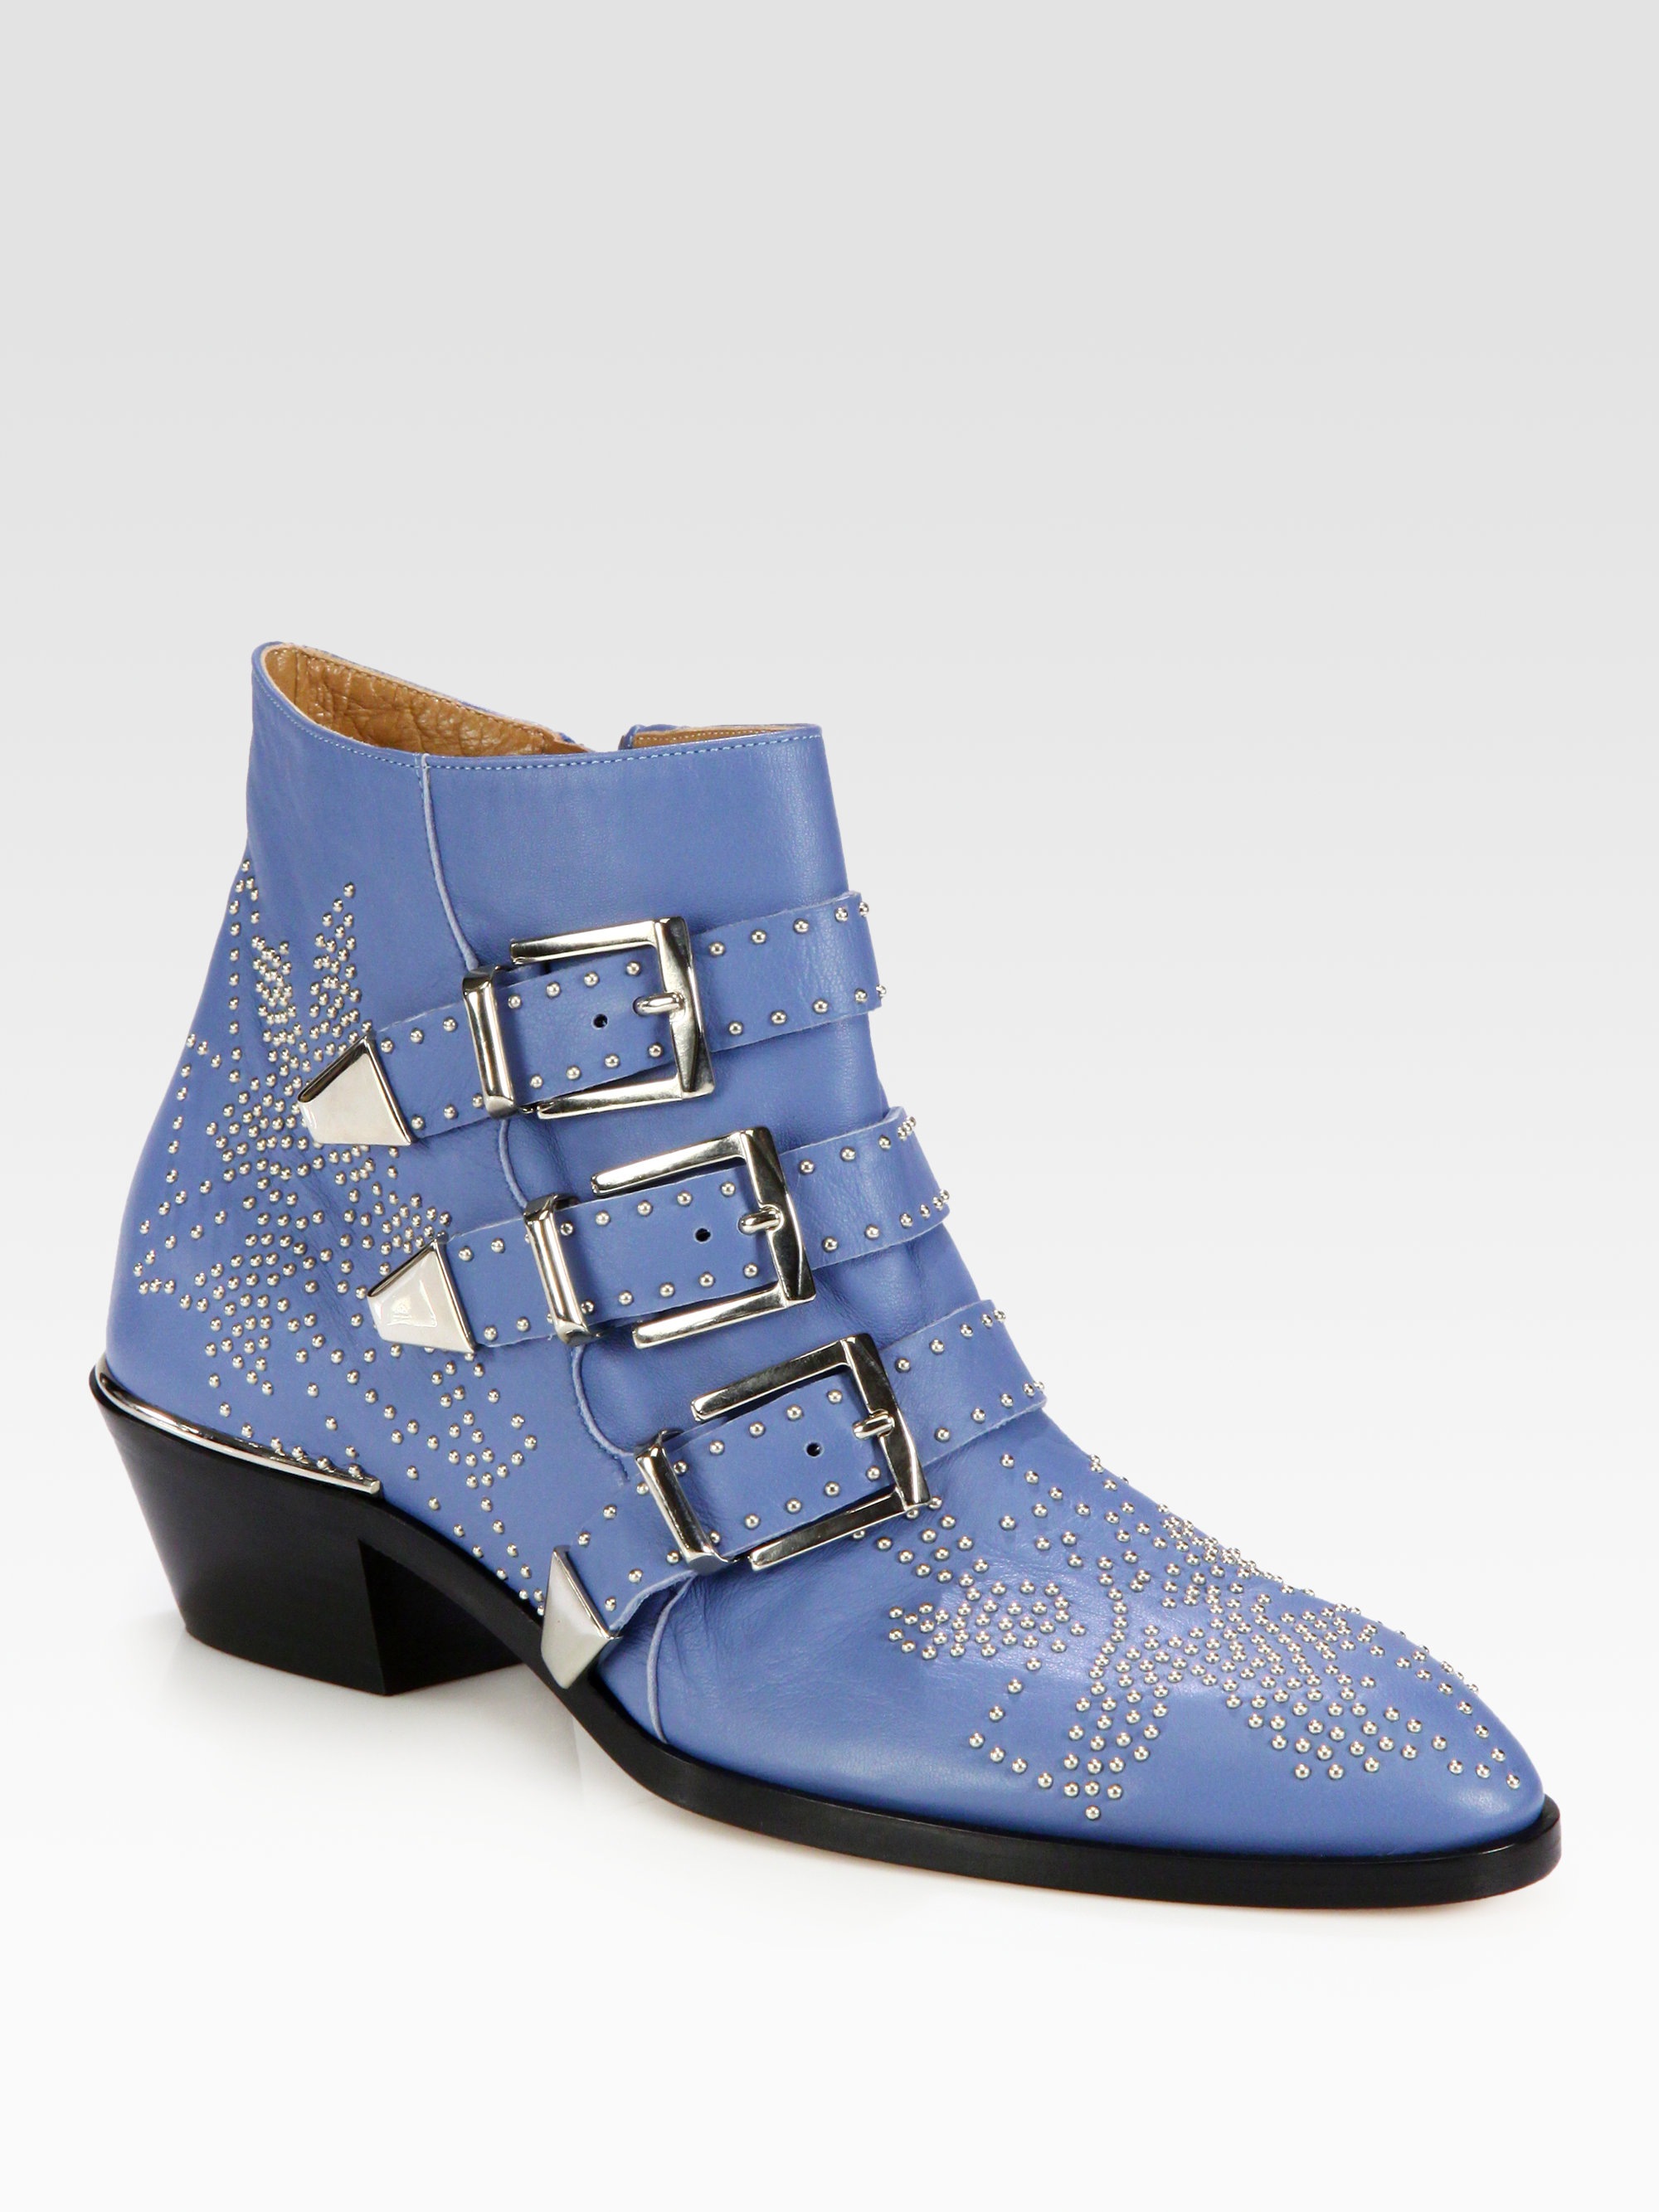 Chloe Blue Studded Leather Buckle Ankle Boots Product 1 6035803 020920784 